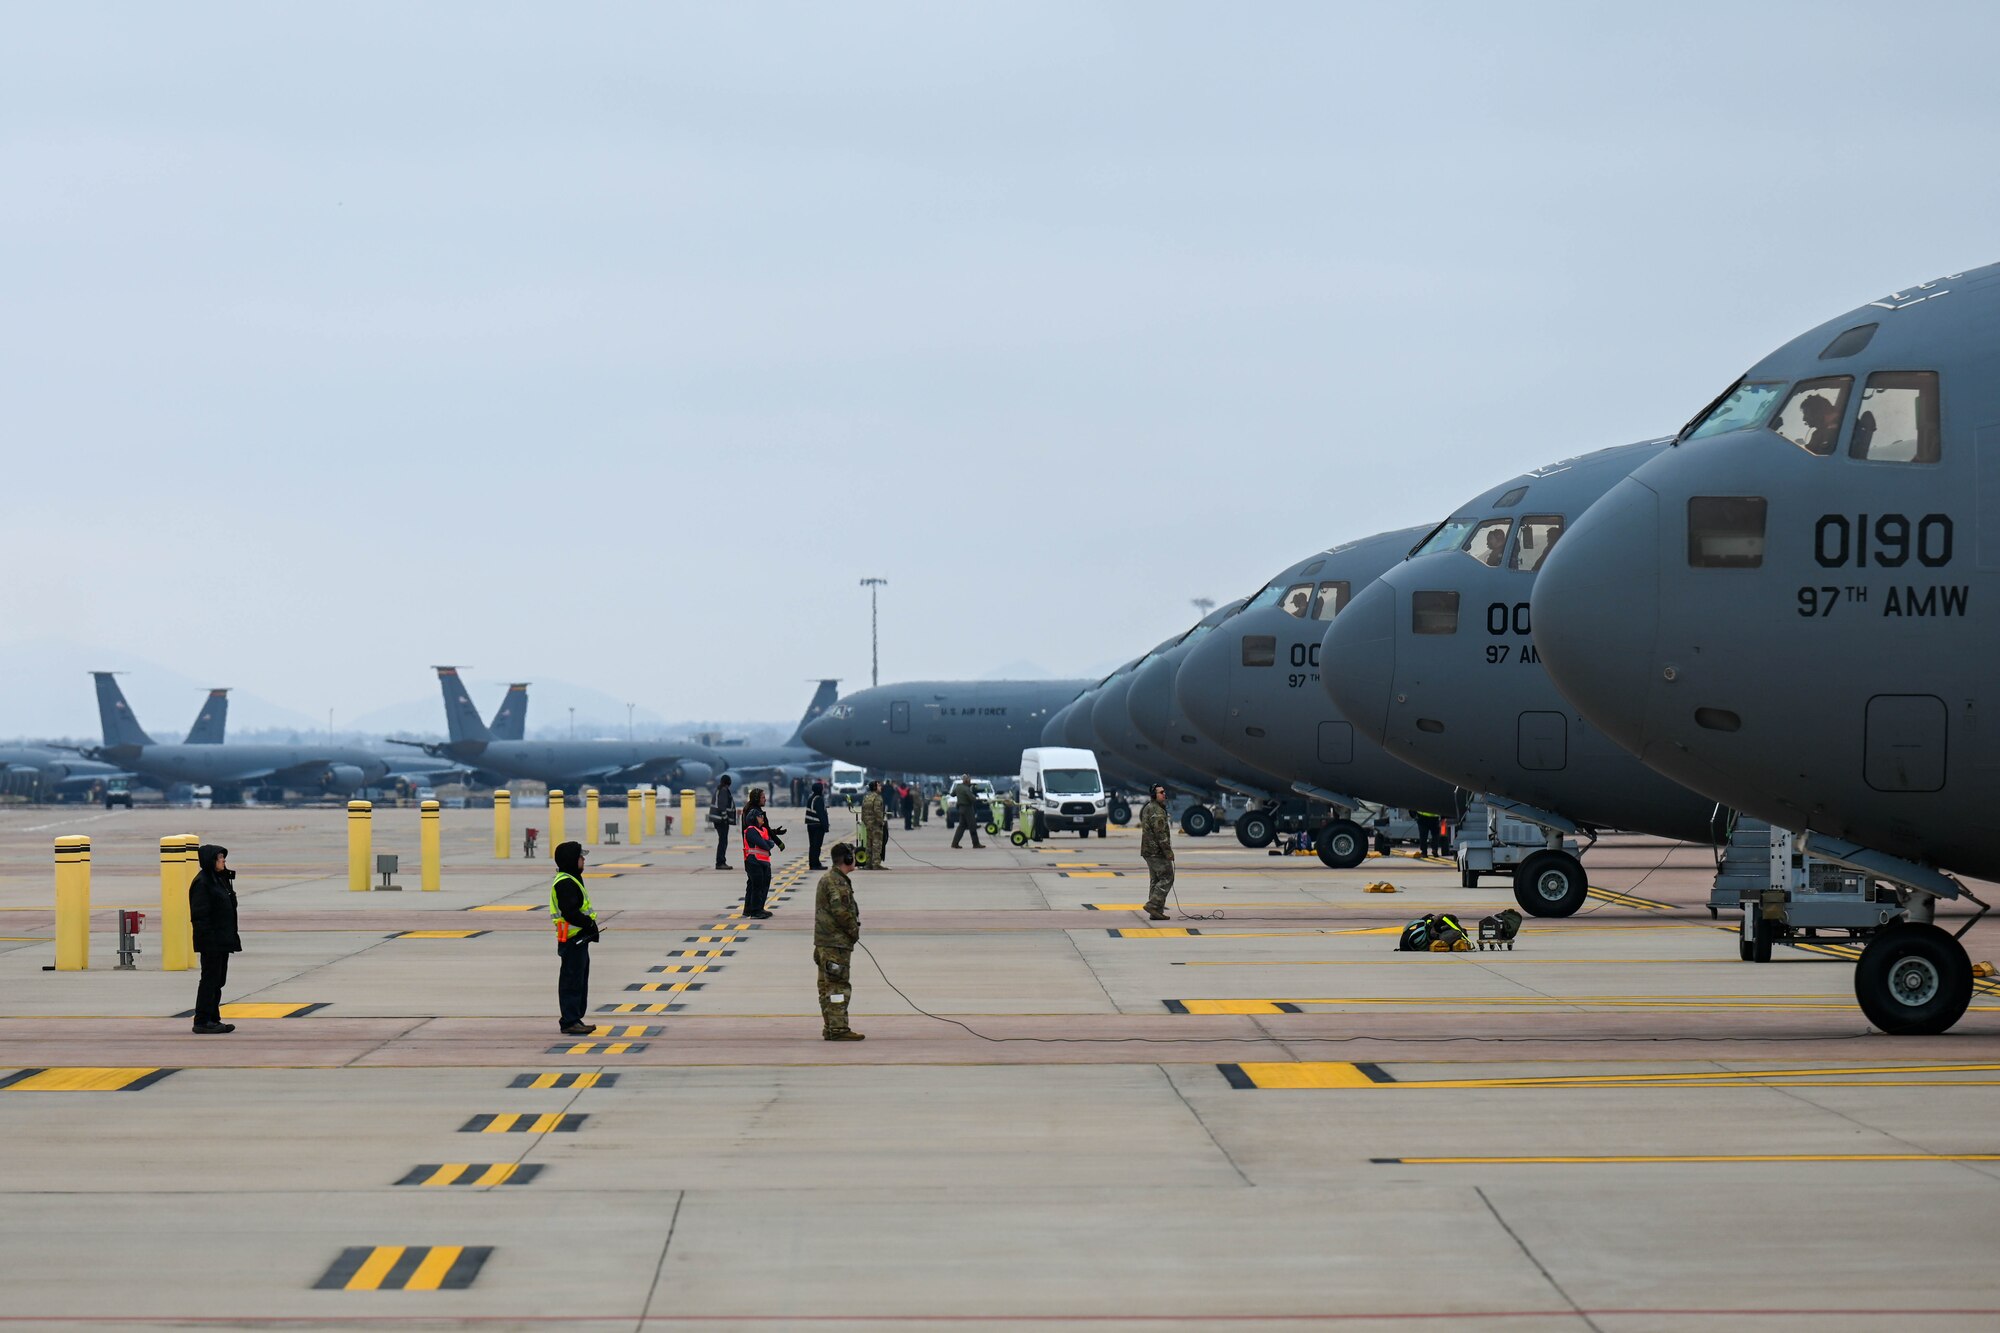 Members of the 97th Aircraft Maintenance Squadron and 58th Airlift Squadron conduct pre-flight checks on C-17 Globemaster IIIs in preparation for a large force exercise at Altus Air Force Base, Oklahoma, March 24, 2023. A total of eight C-17s were generated, launched, and recovered as part of this exercise. (U.S. Air Force photo by Senior Airman Trenton Jancze)